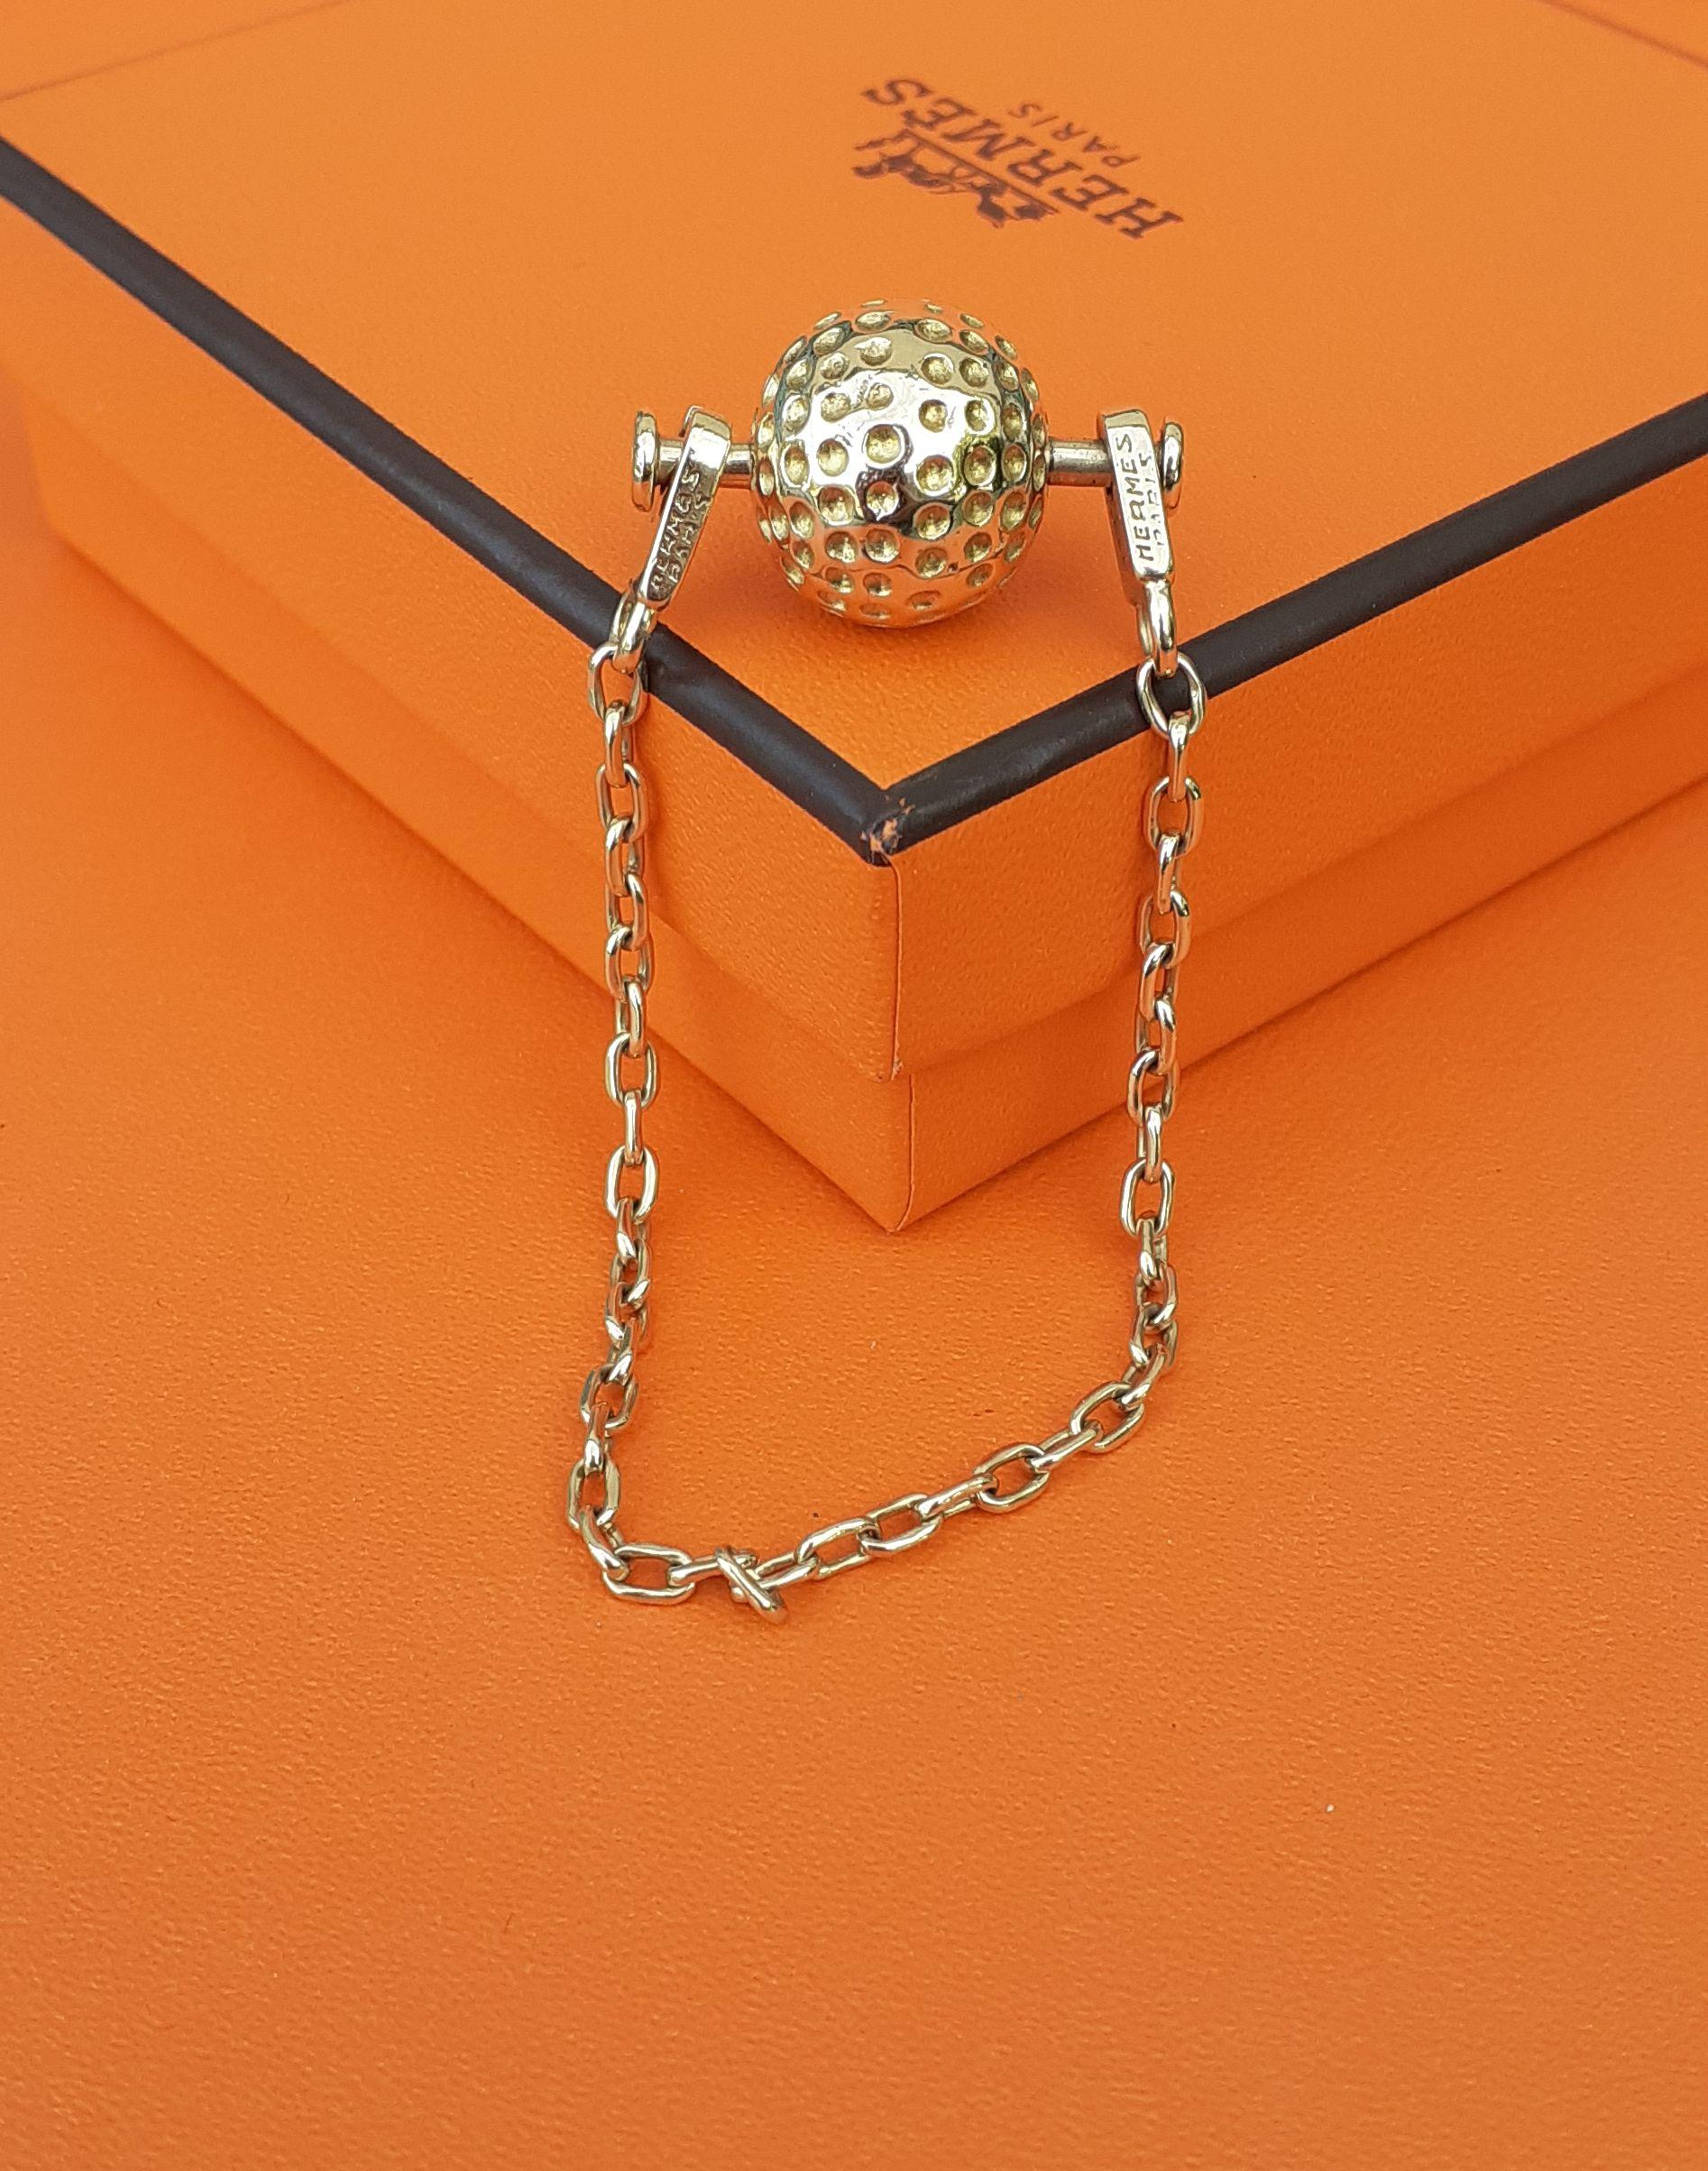 Rare and Beautiful Authentic Hermès Key Holder

Shape: Golf Ball

Vintage Item

Made of Yellow Gold 

Colorway: Yellow Gold

